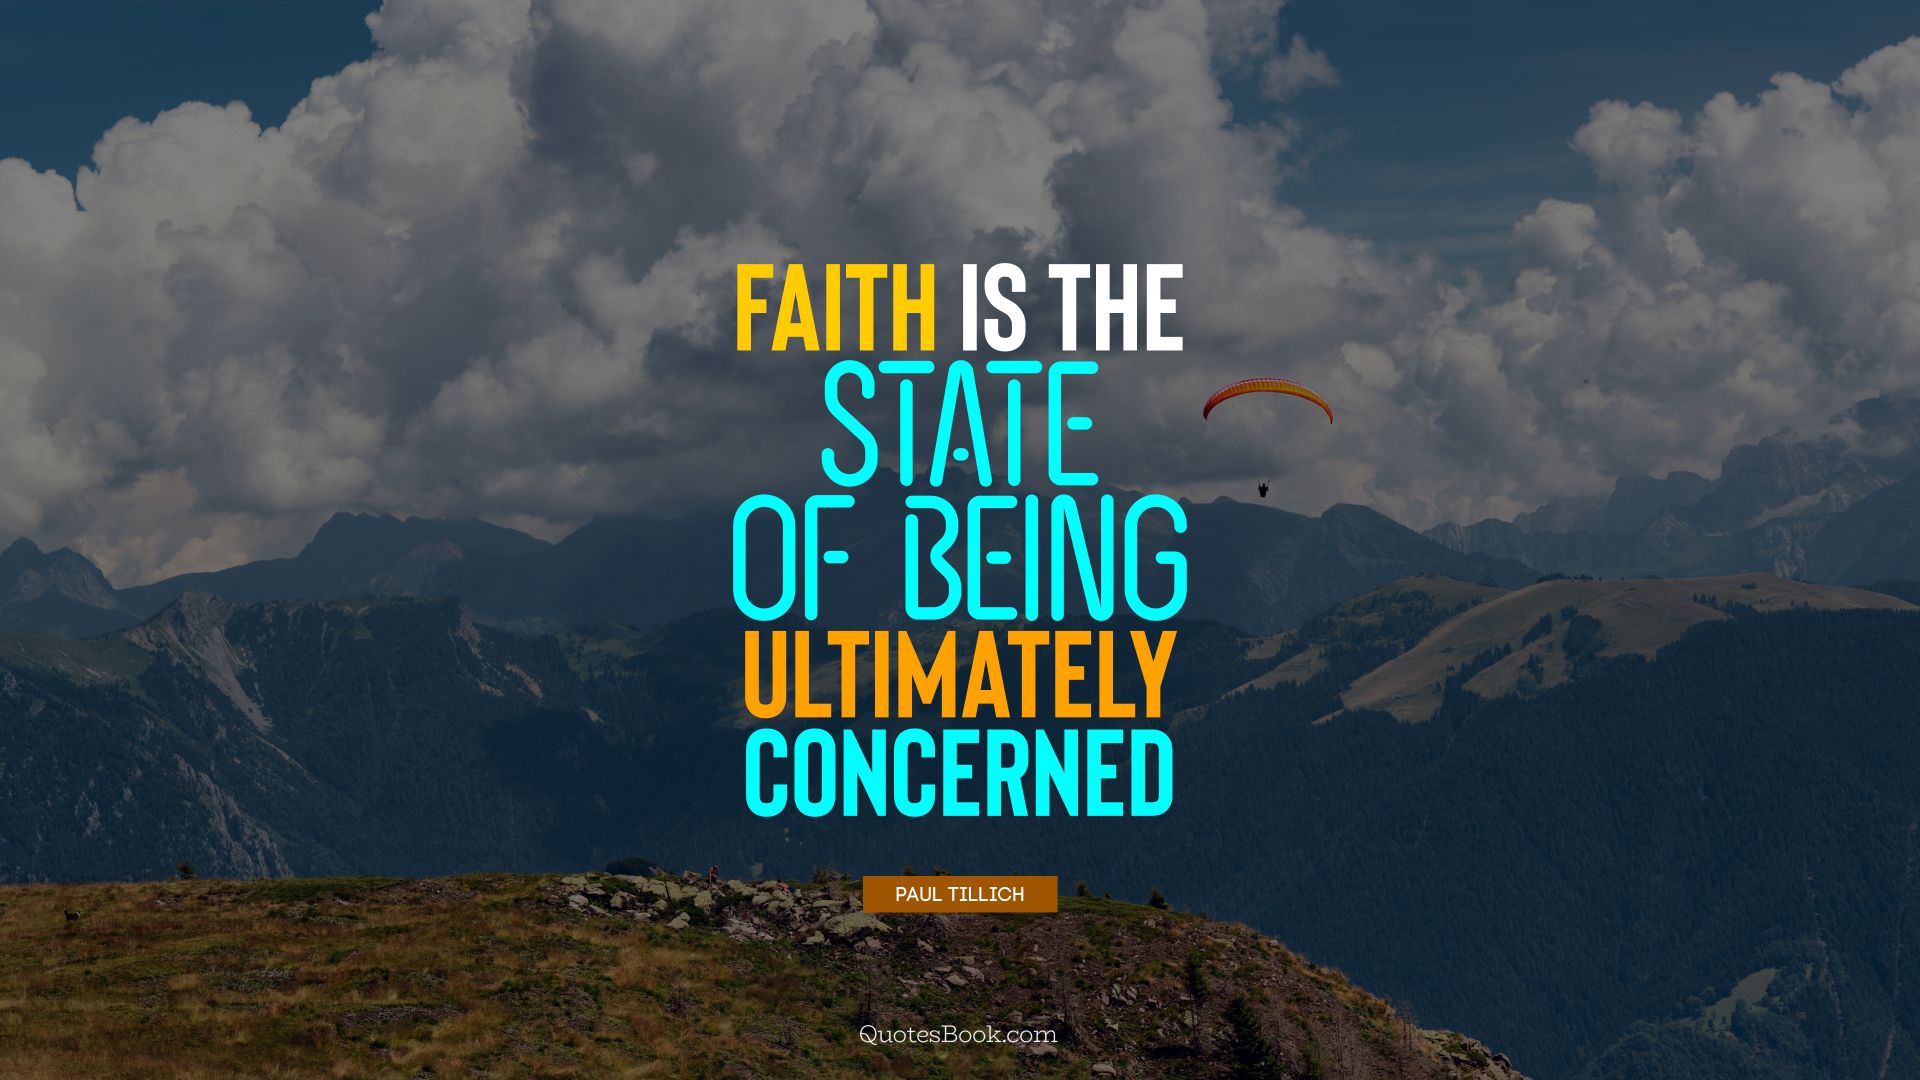 Faith is the state of being ultimately concerned. - Quote by Paul Tillich